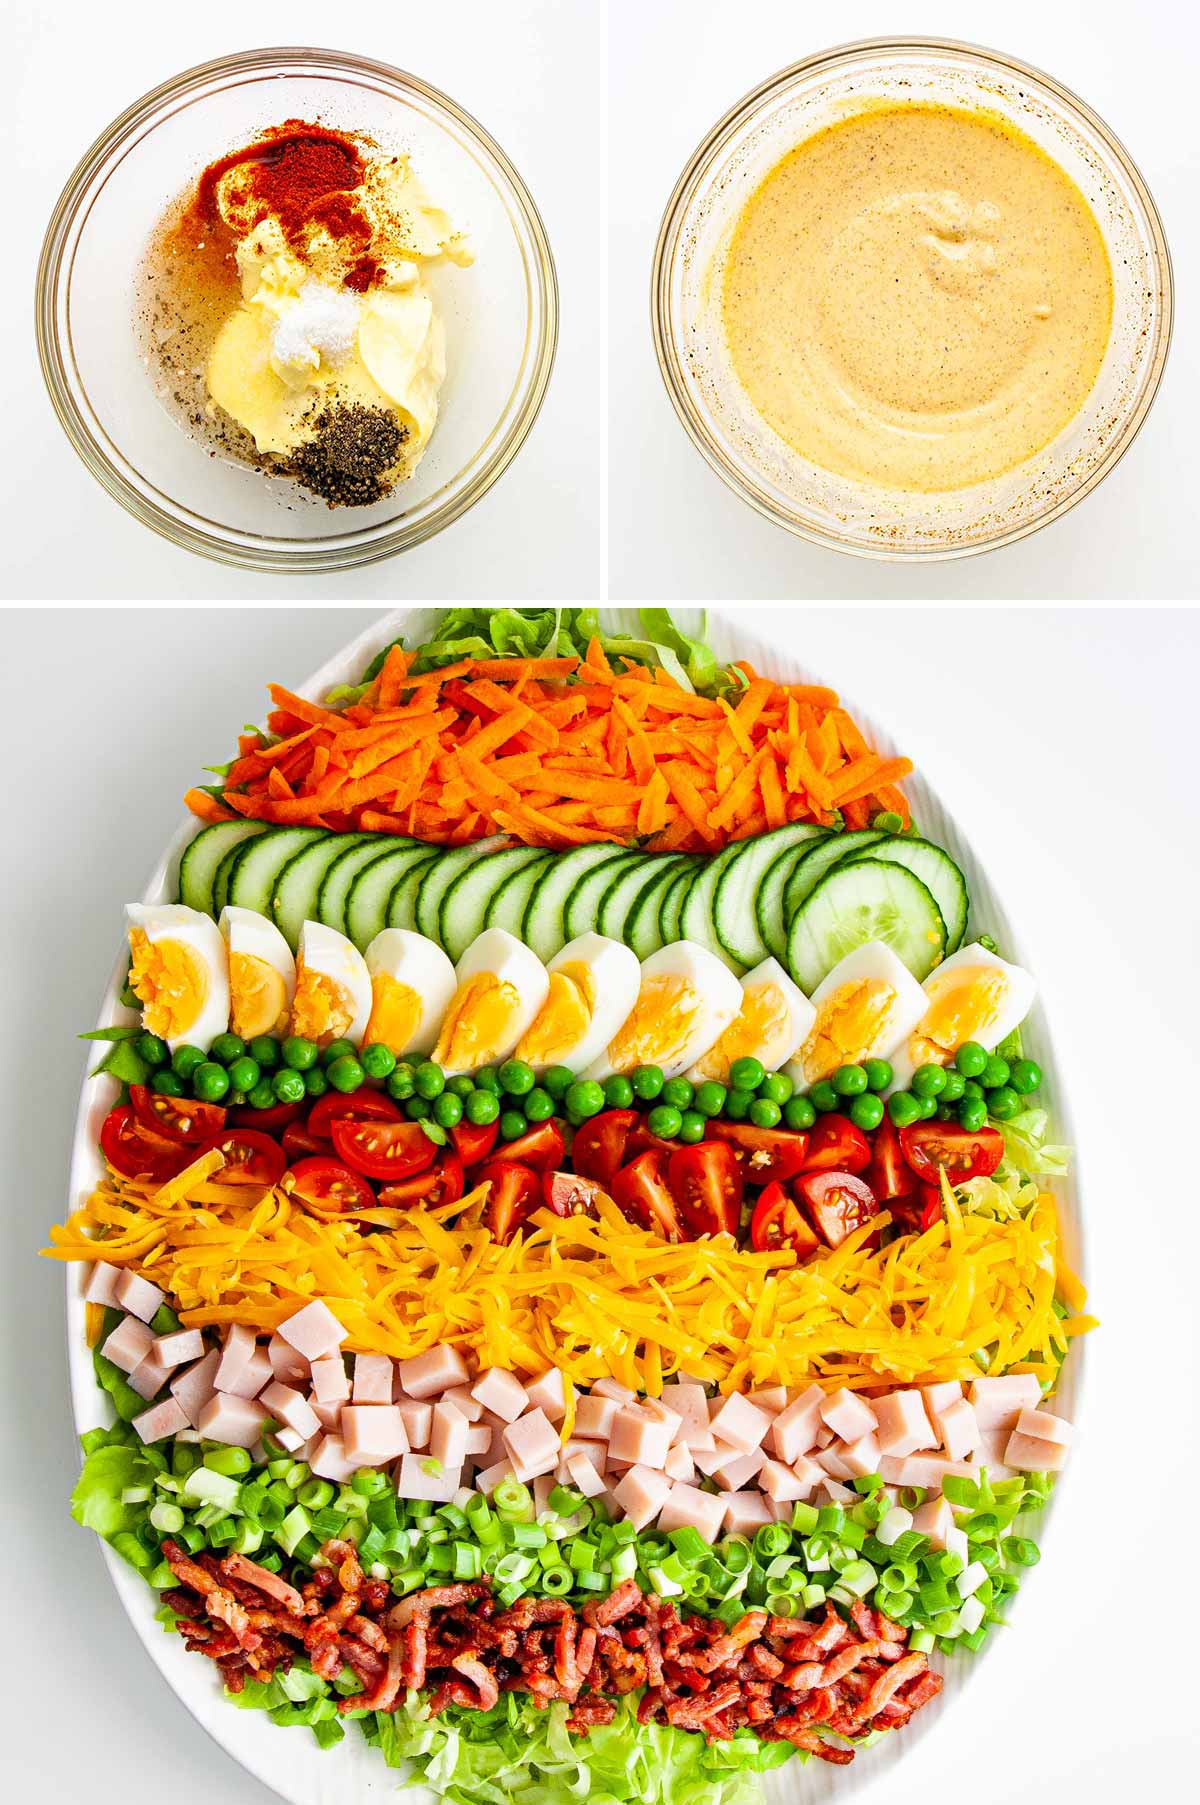 detailed process shots showing how to make chef salad